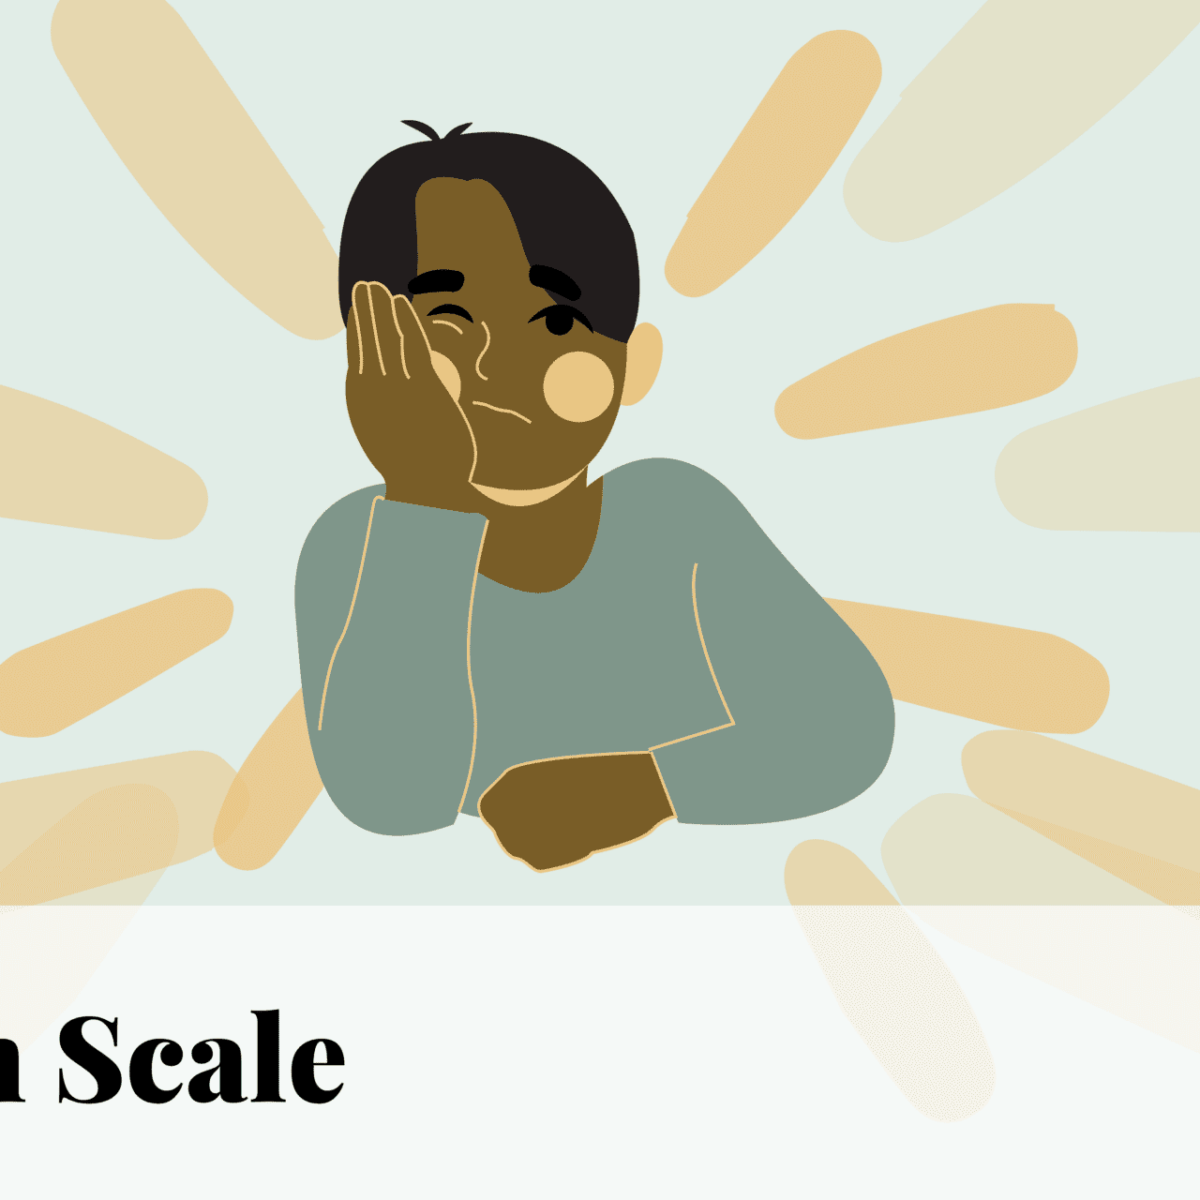 Faces Pain Scale: A New Approach to the Wong-Baker Rating Faces